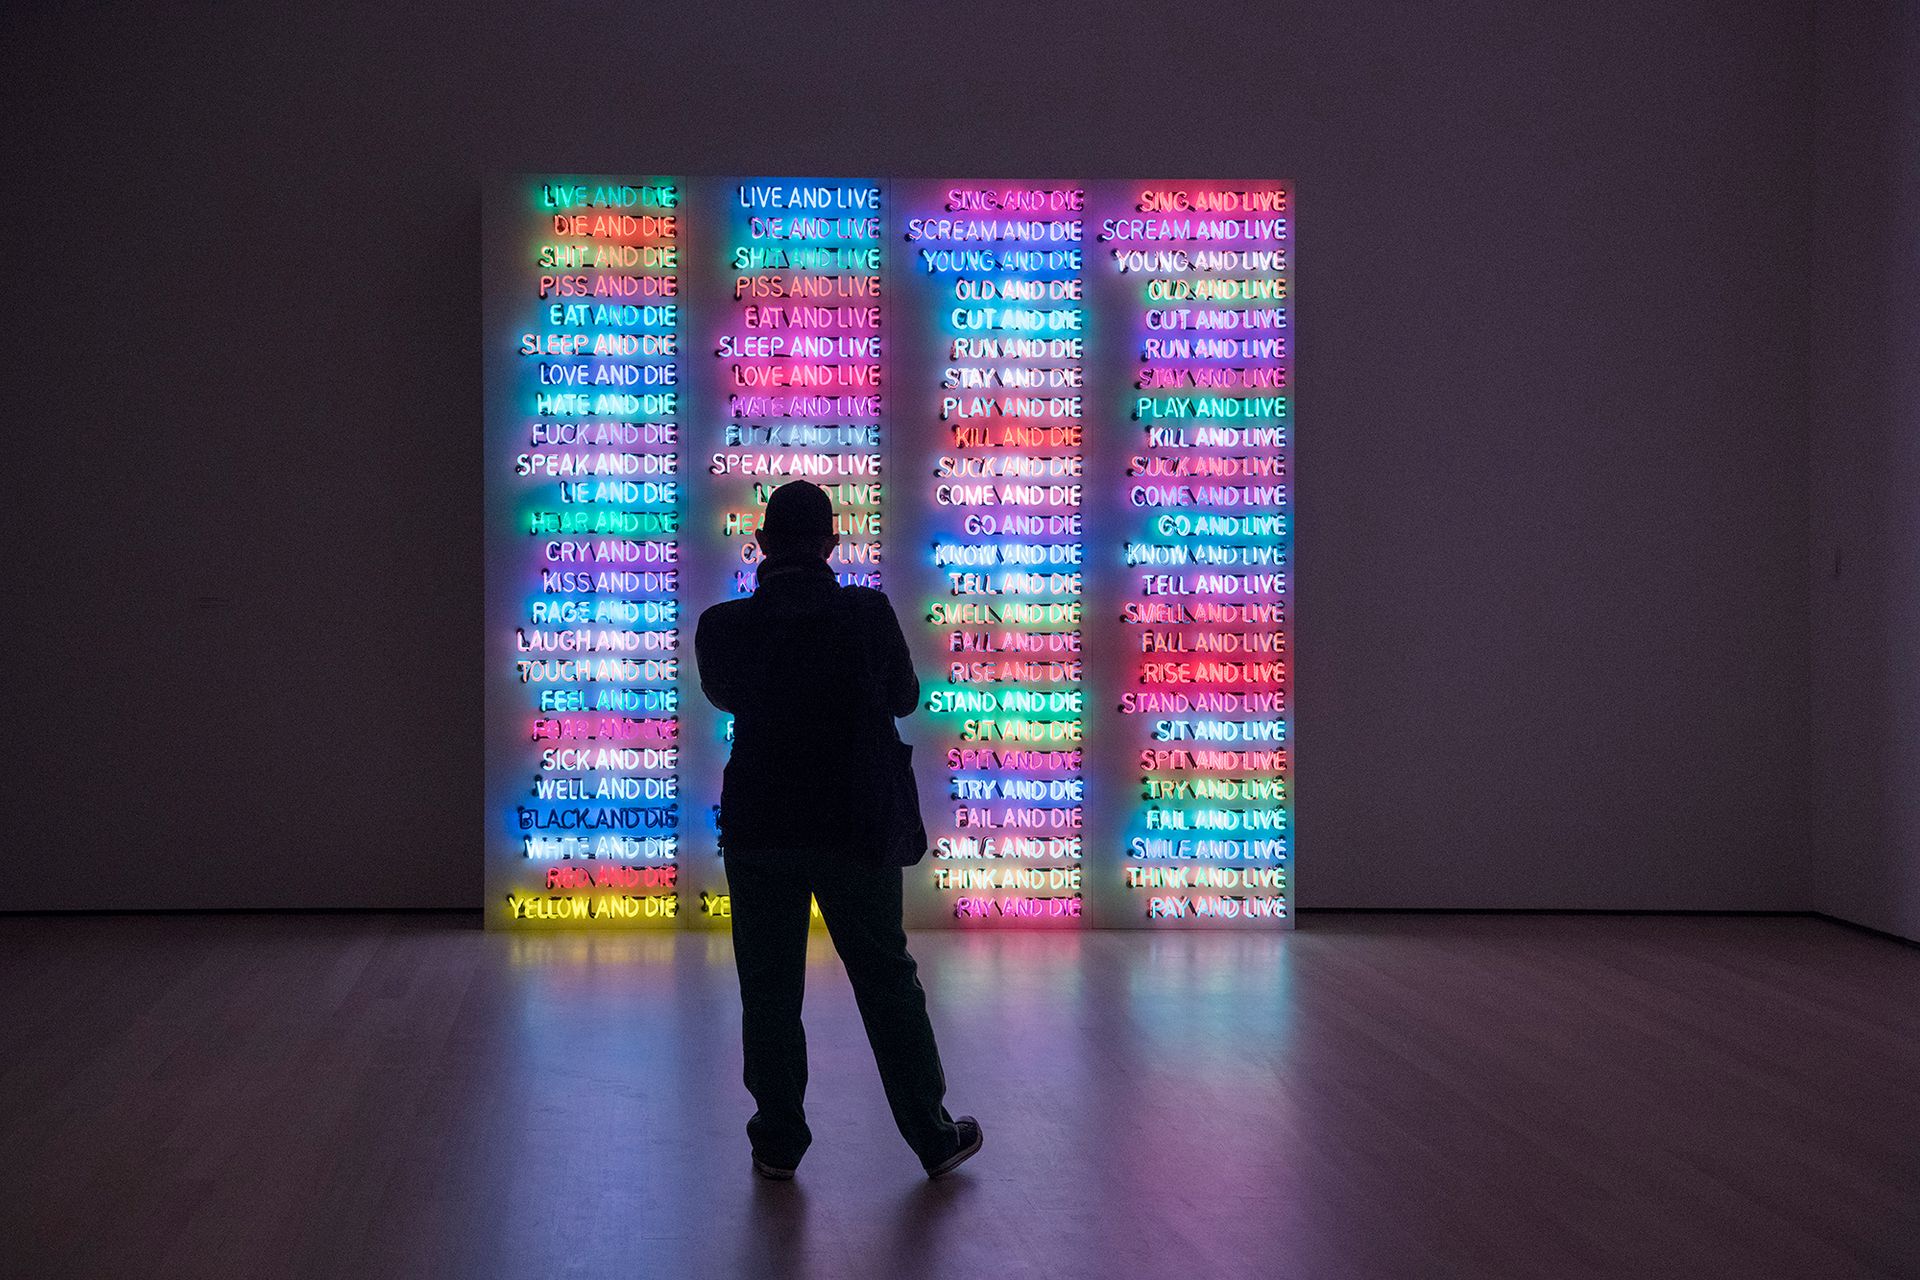 Installation view of Bruce Nauman: Disappearing Acts at The Museum of Modern Art, New York © 2018 Bruce Nauman/Artists Rights Society (ARS), New York. Digital image: © 2018 The Museum of Modern Art, New York. Photo: Martin Seck